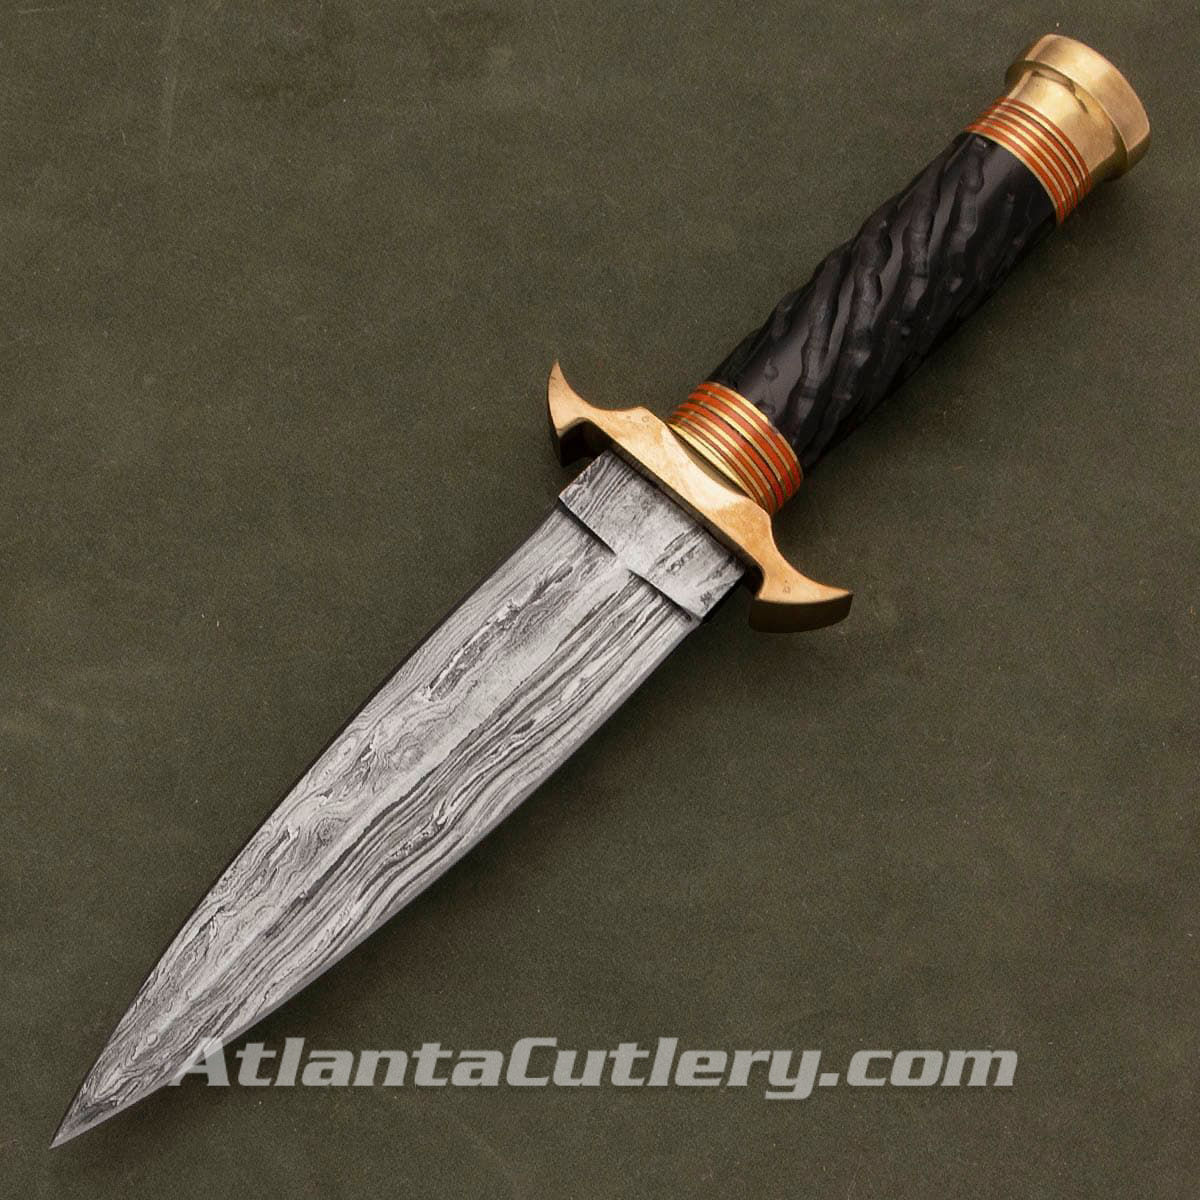 Fang of the Dragon Double Edged Damasus Dagger